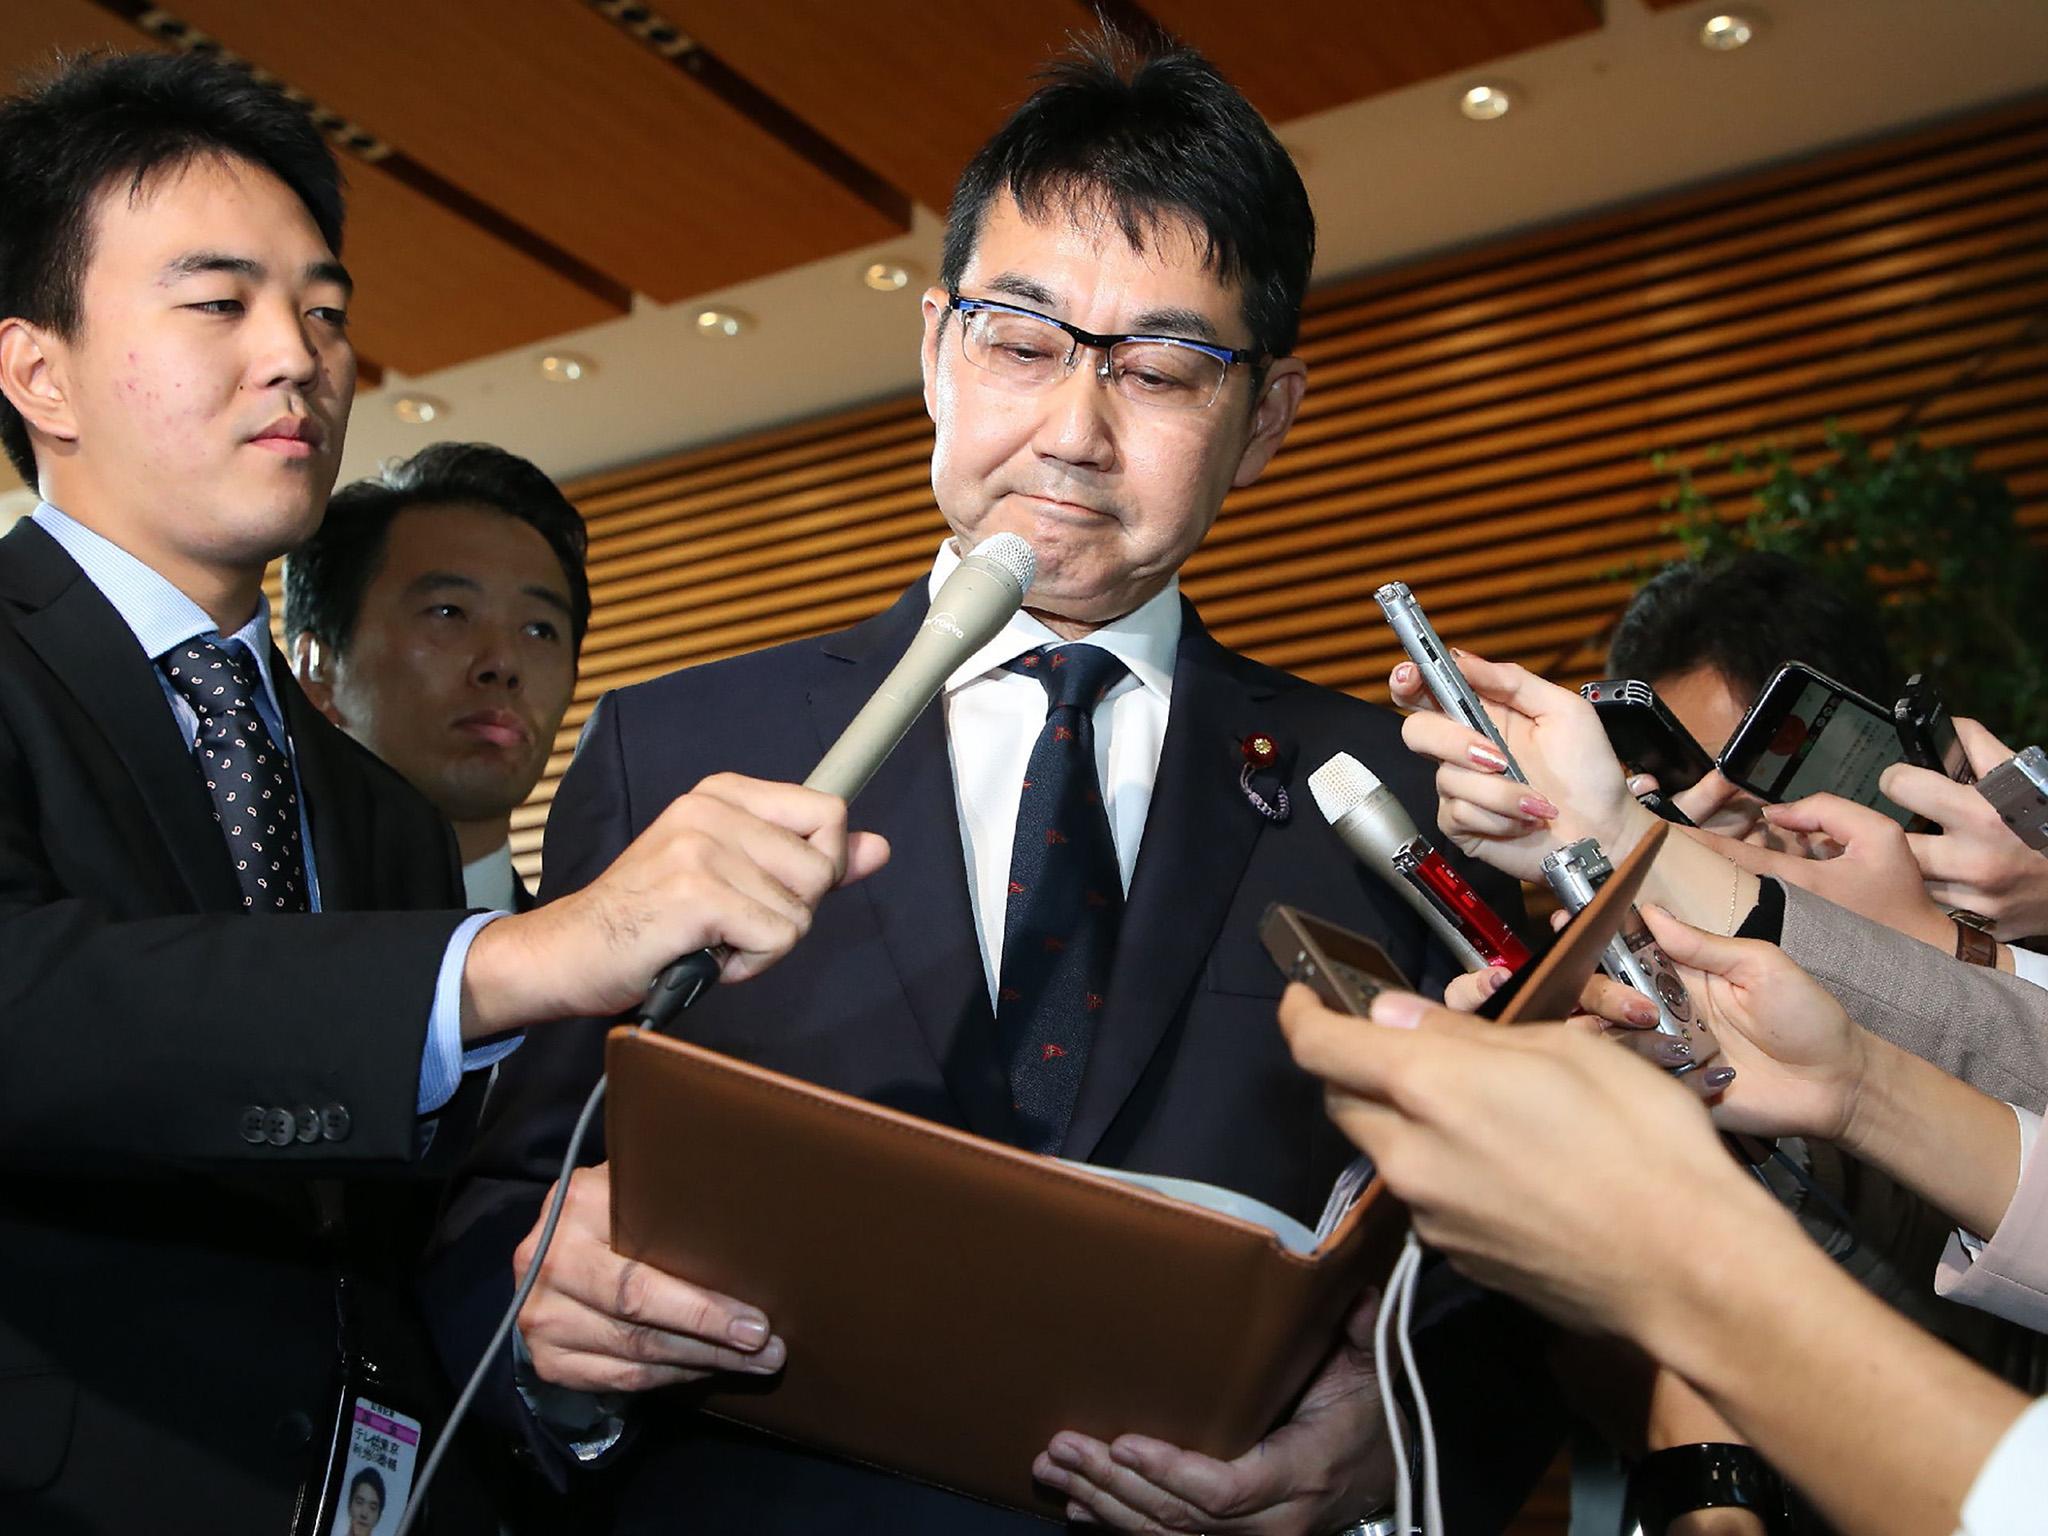 Justice minister Katsuyuki Kawai stepped down after giving a gift of potaoes to constituents